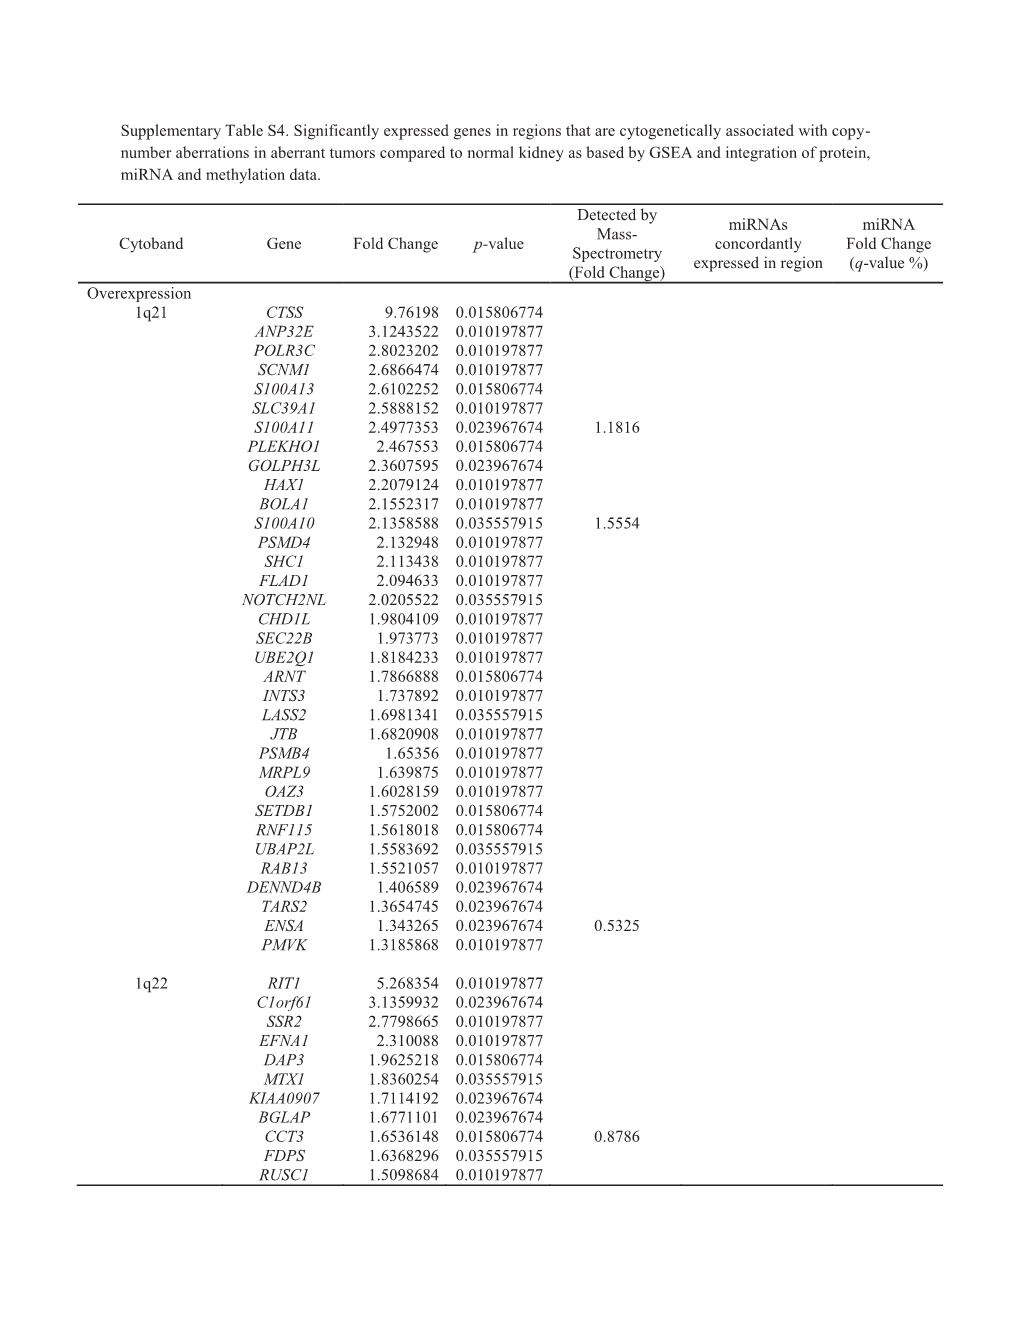 Supplementary Table S4. Significantly Expressed Genes in Regions That Are Cytogenetically Associated with Copy- Number Aberratio